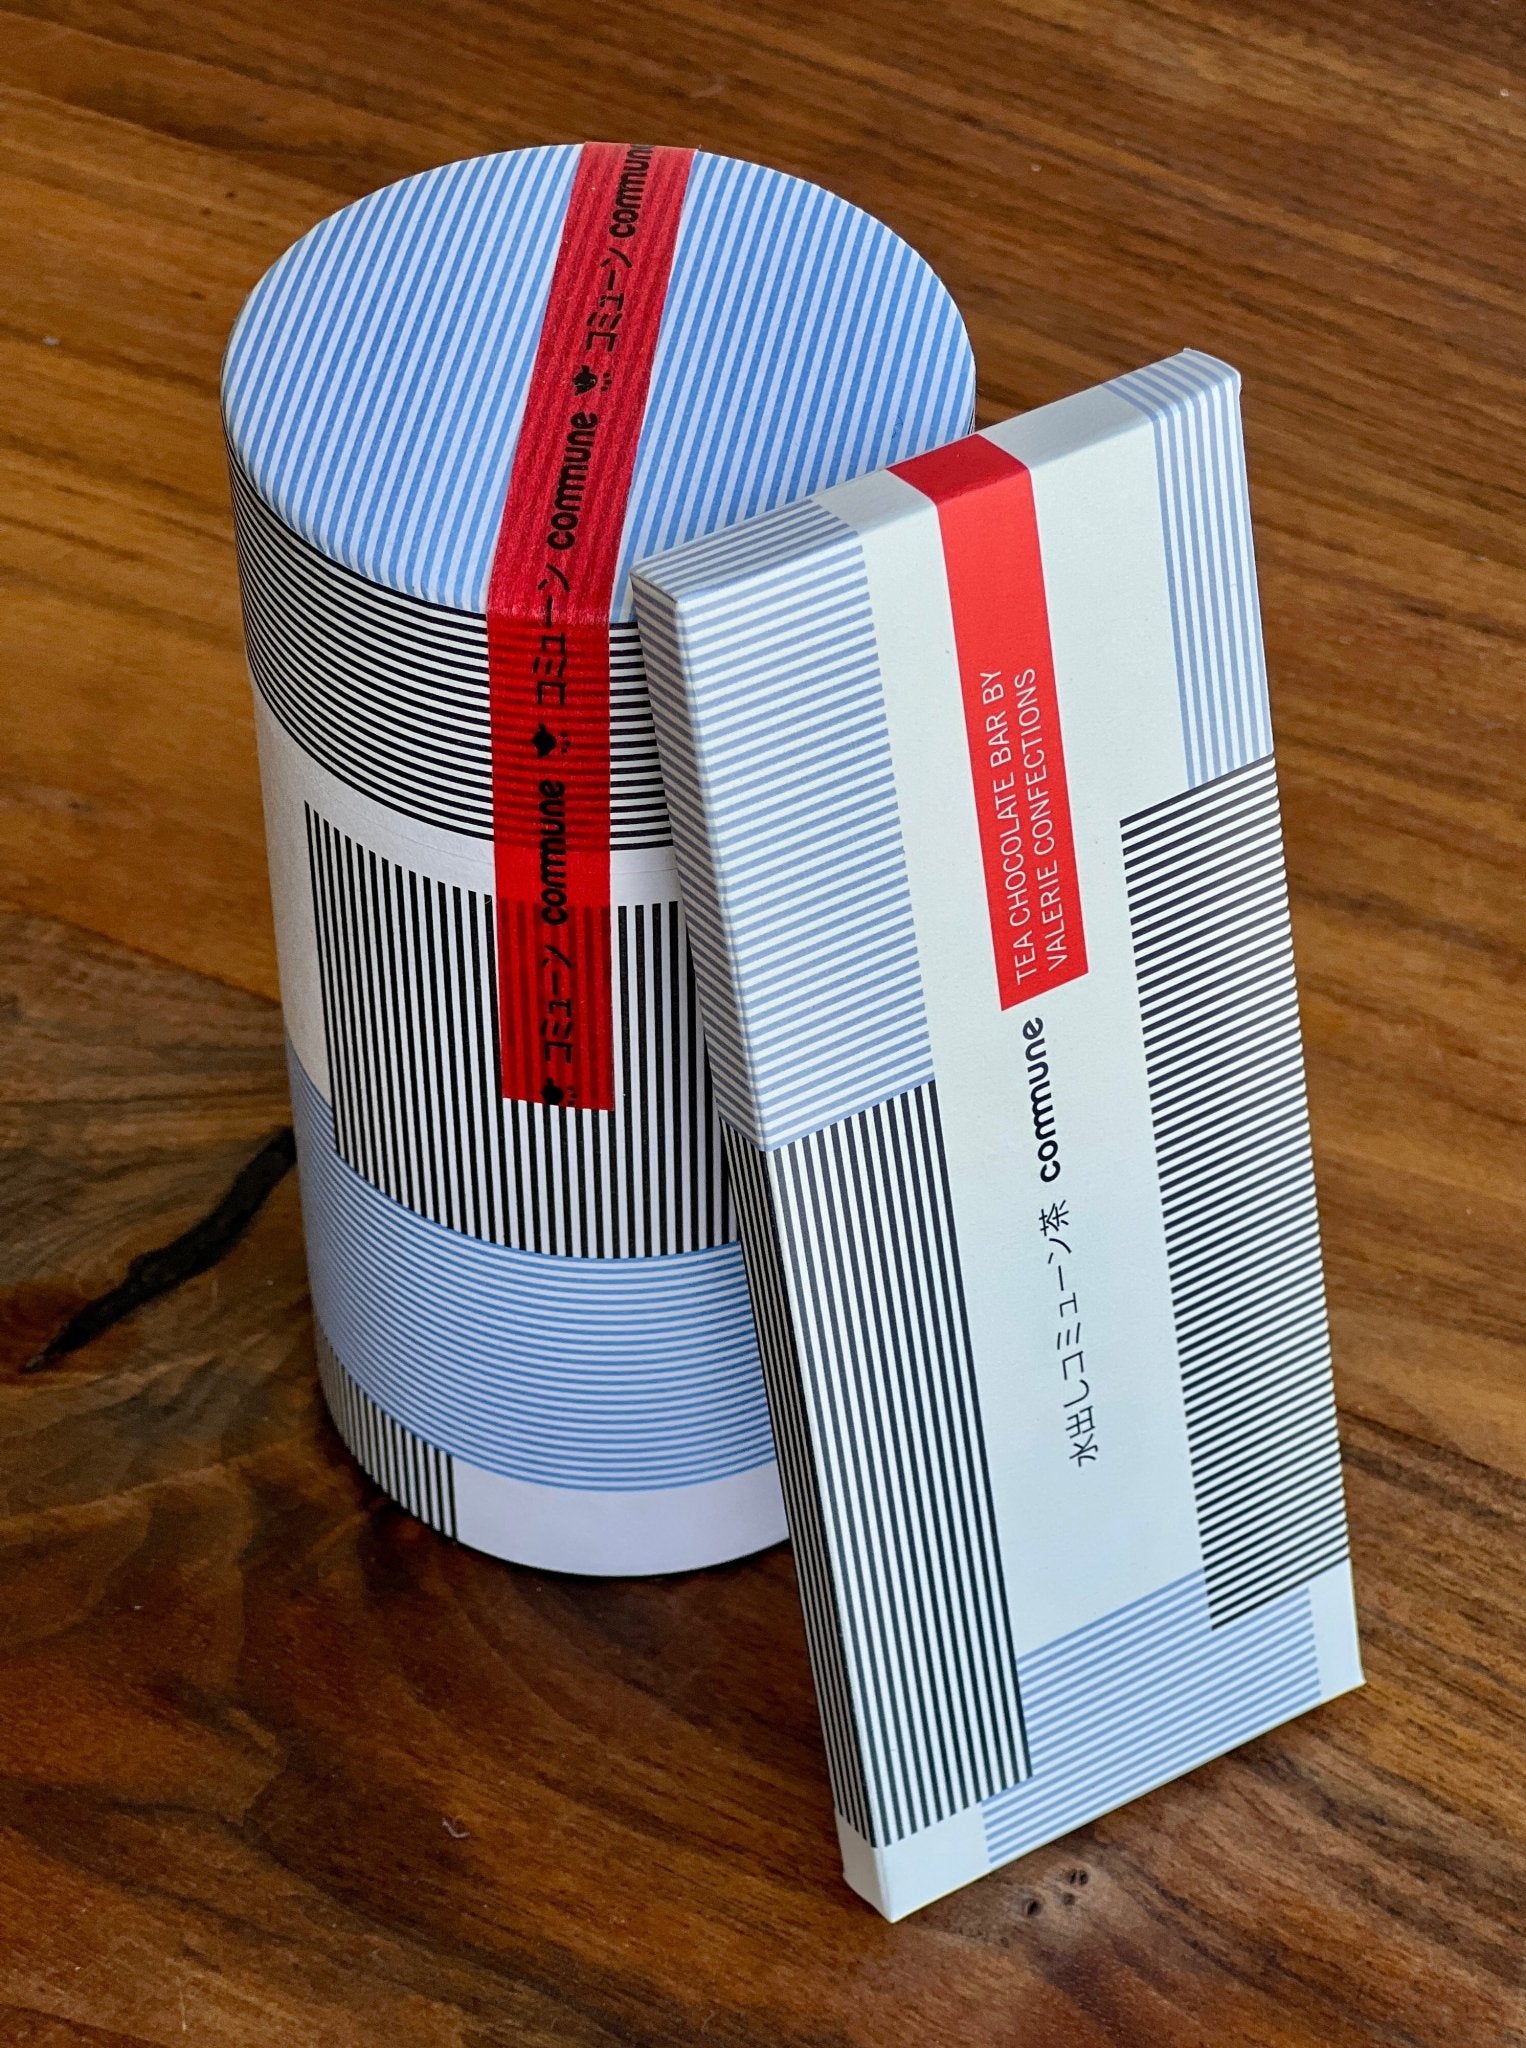 Modern-designed packaging of a cocoa product: cylindrical container and a rectangular chocolate bar, both featuring blue, white, and black minimalistic stripes and a red band with the brand name "commune".